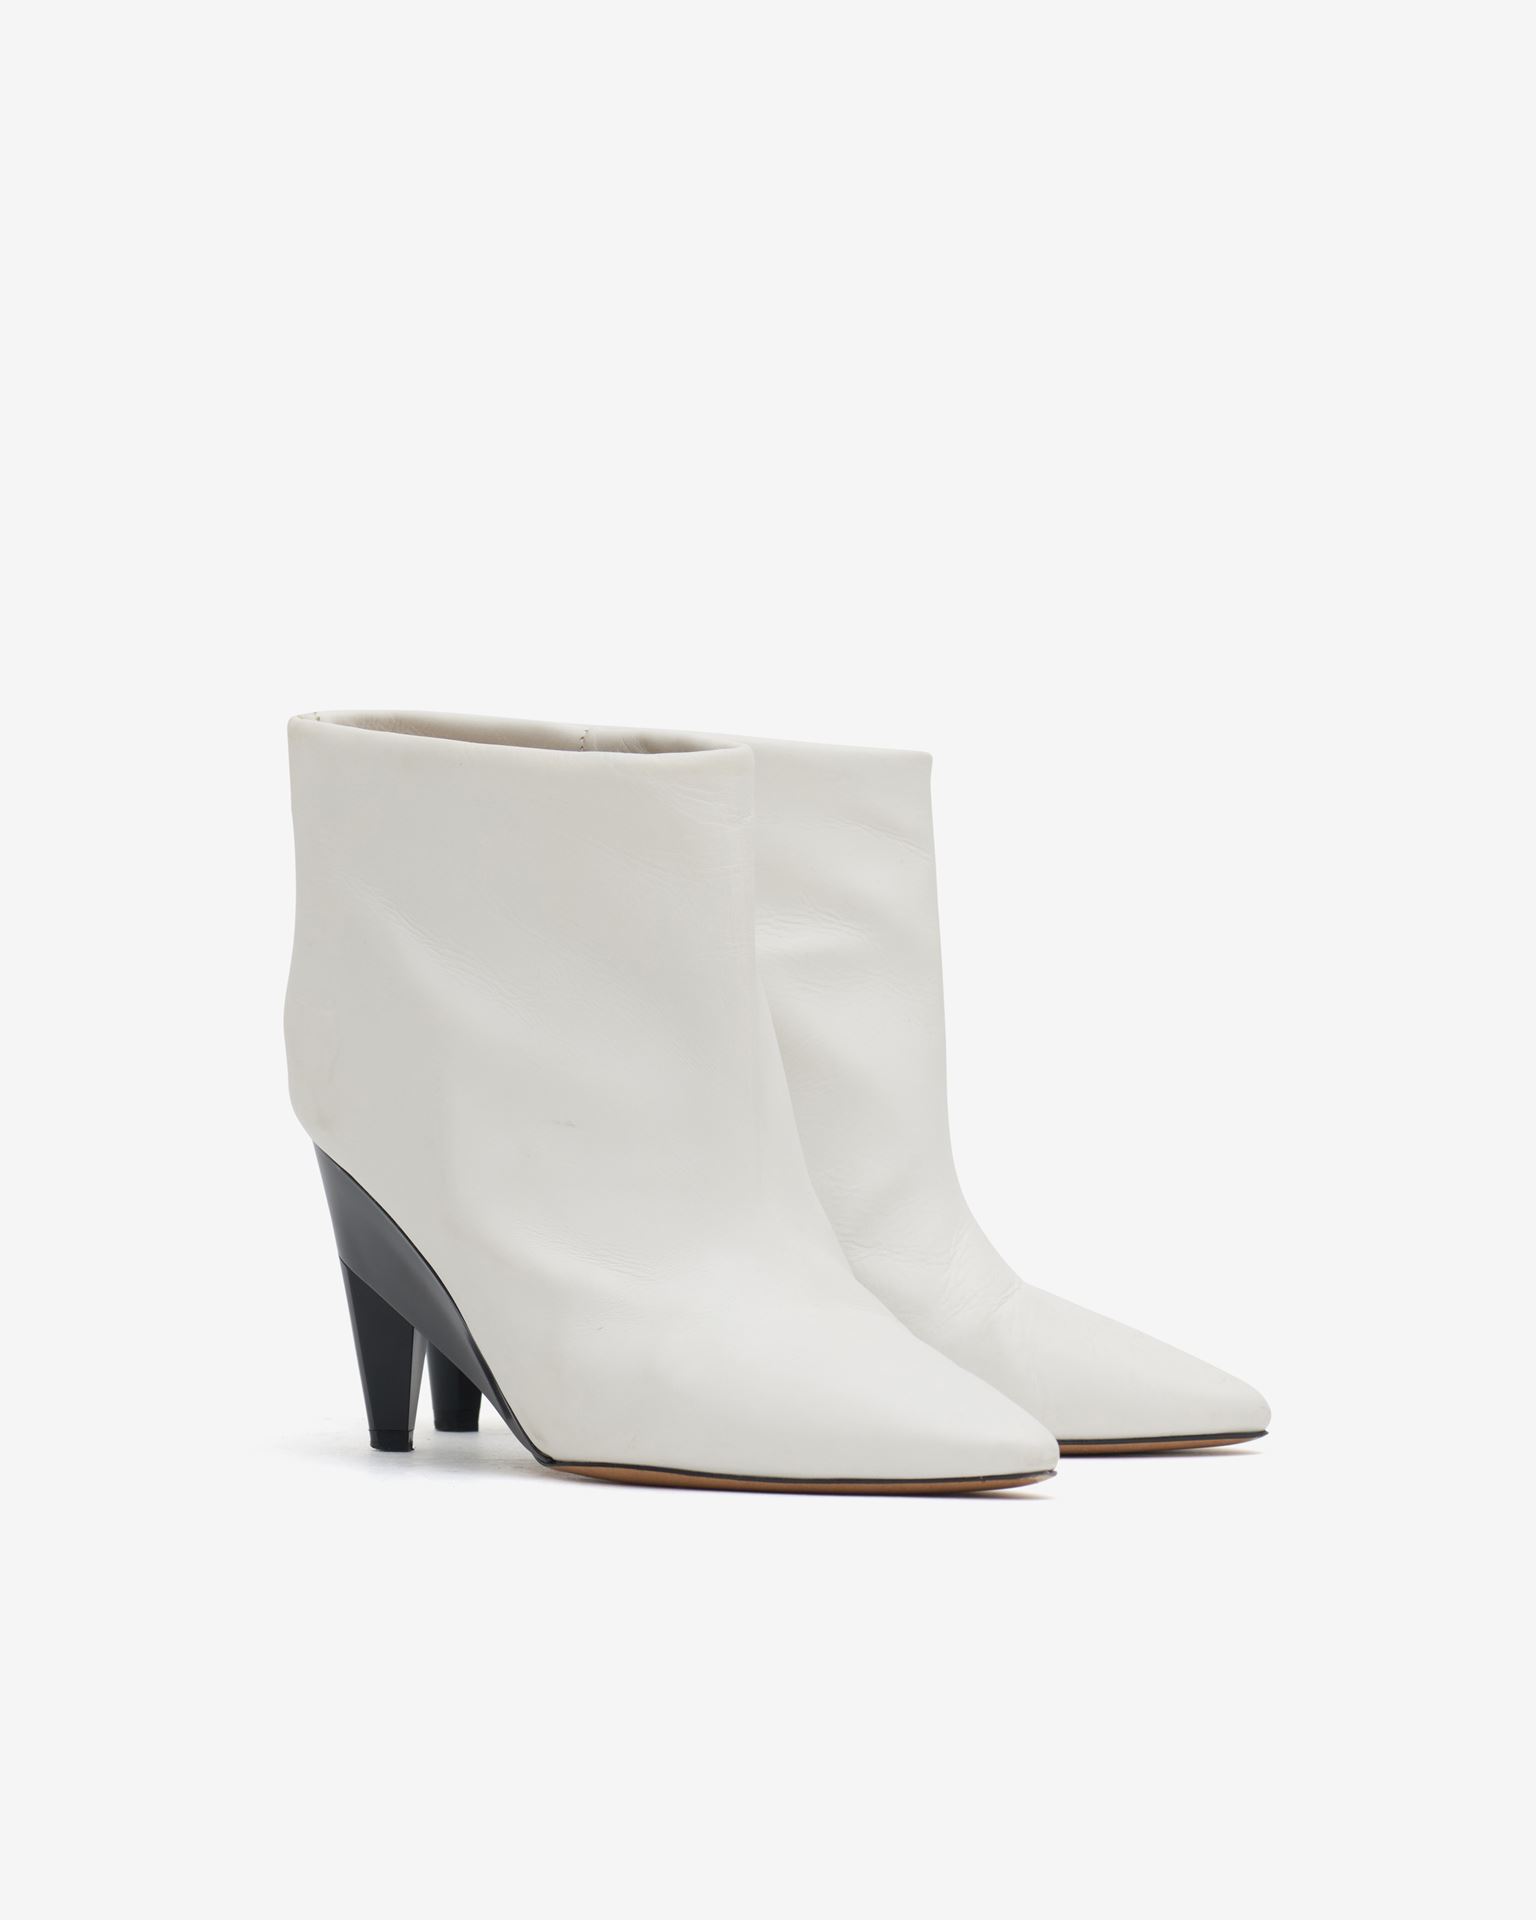 Isabel Marant, Dylvee Leather Low Boots - Women - White